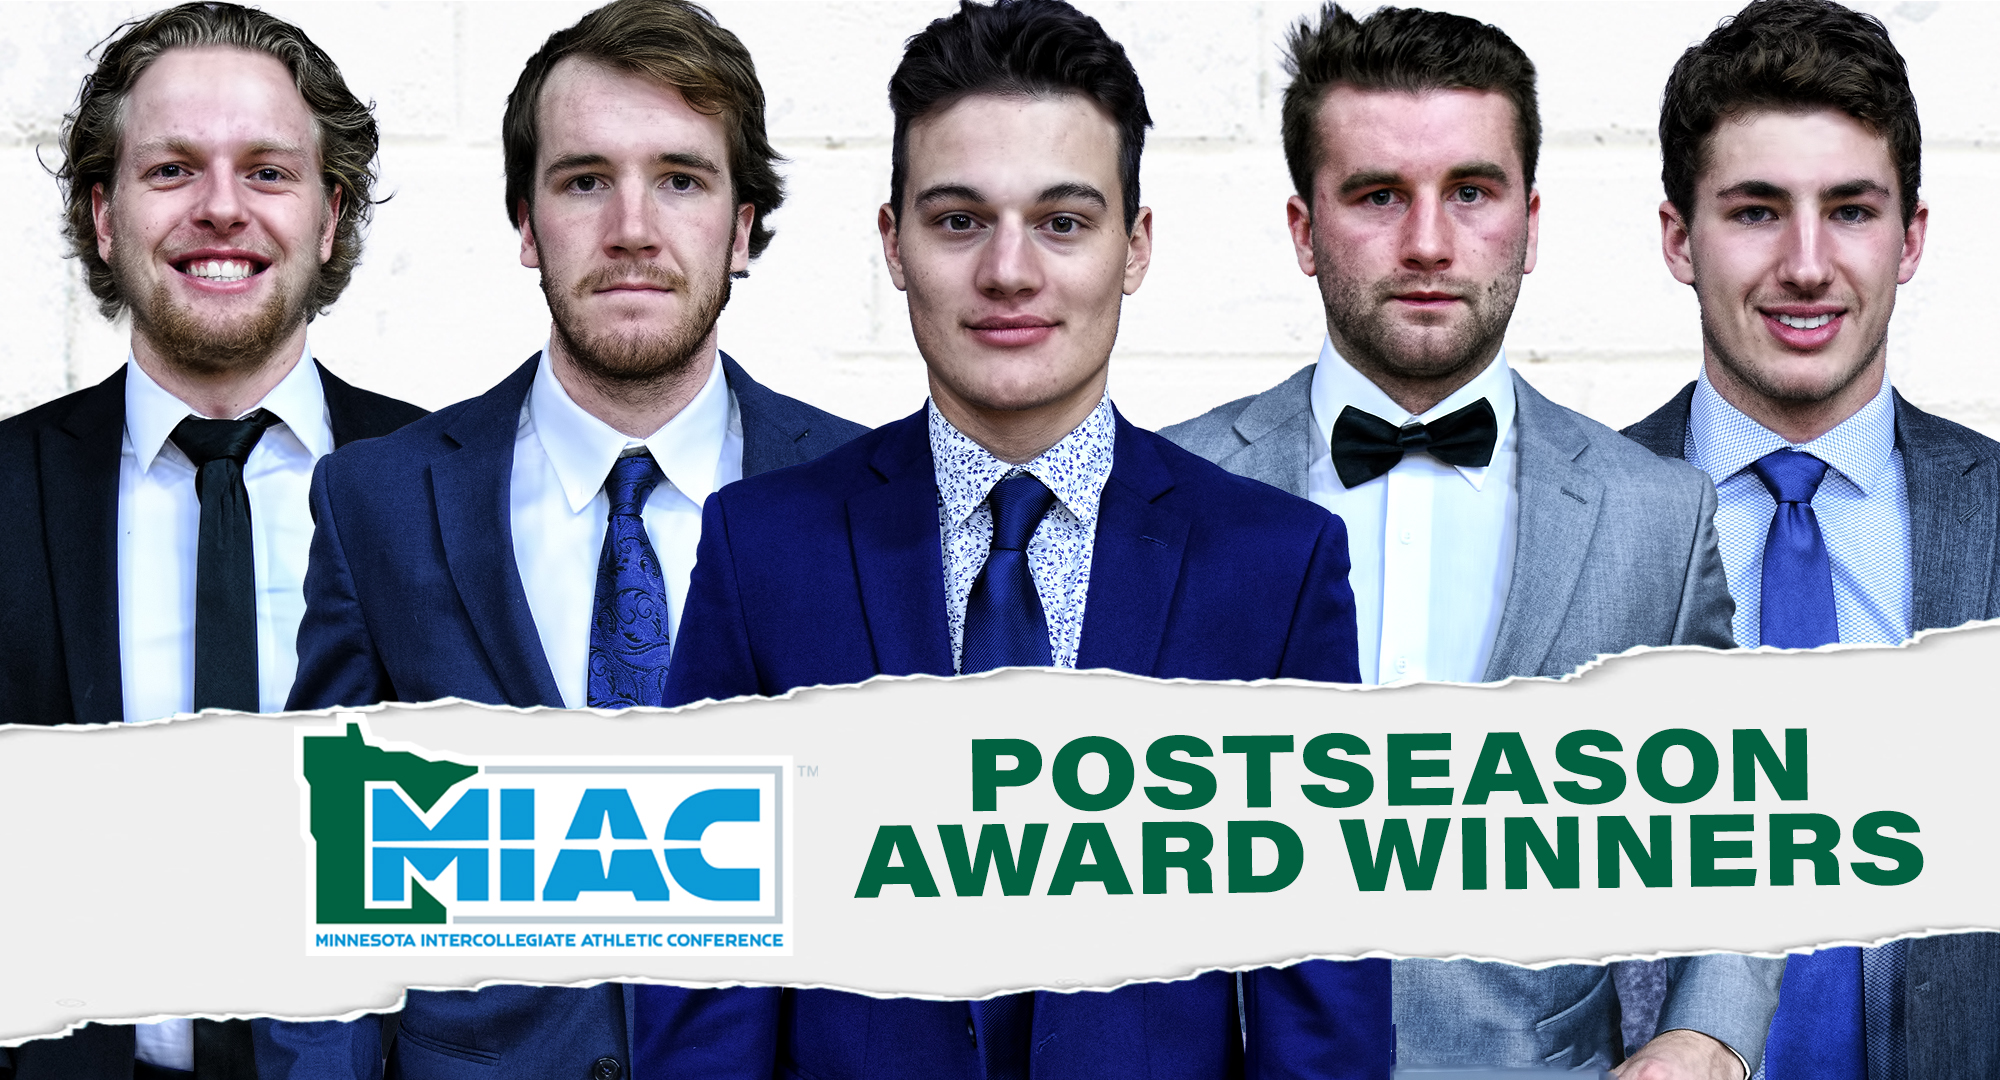 (L-R) Isaac Henkemeyer-Howe, Alex Stoley, Tyler Bossert, Cole O'Connell and Jaret Lalli all received MIAC postseason honors.